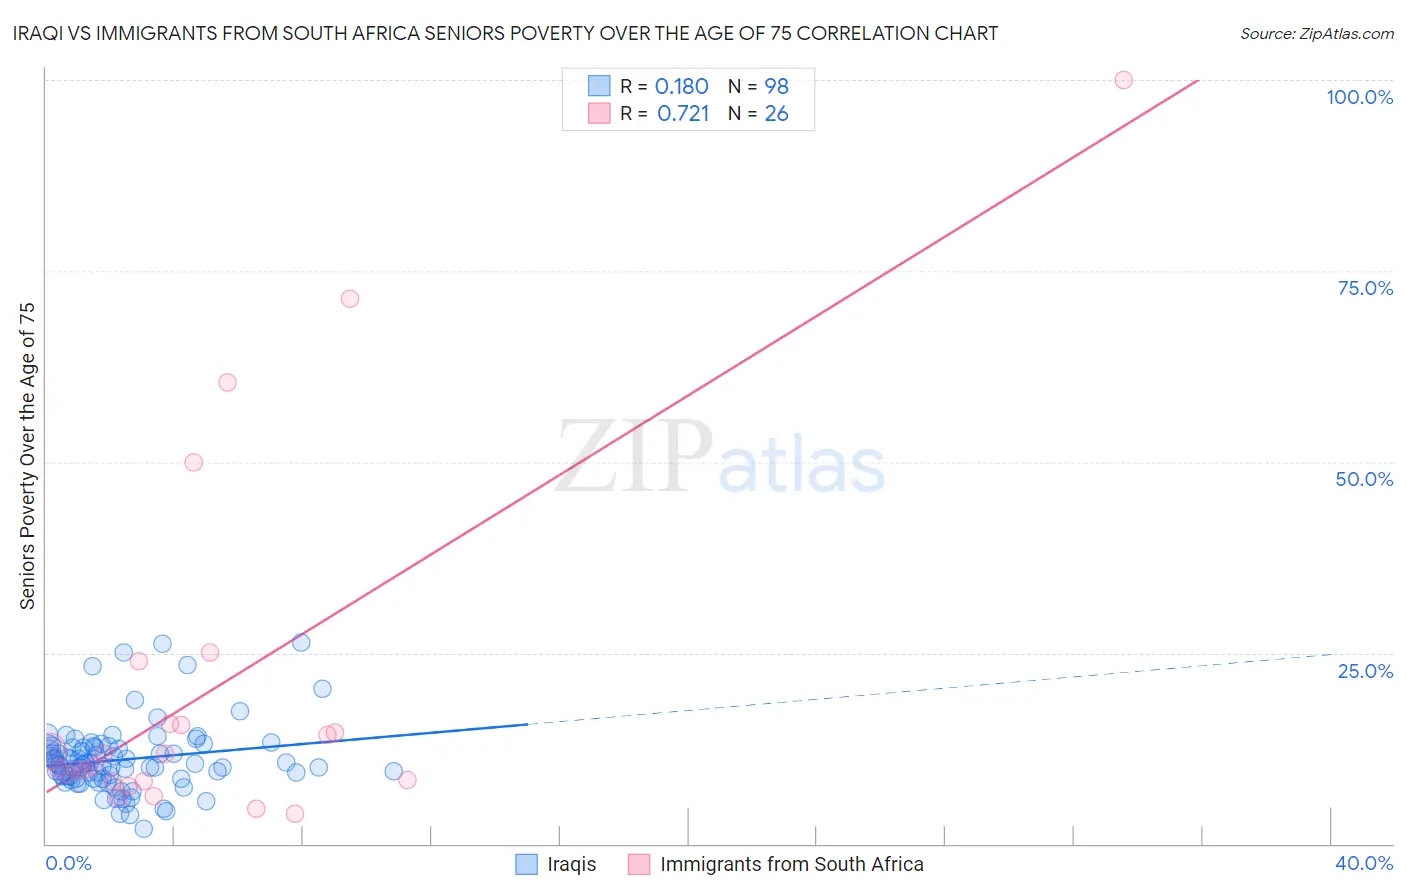 Iraqi vs Immigrants from South Africa Seniors Poverty Over the Age of 75